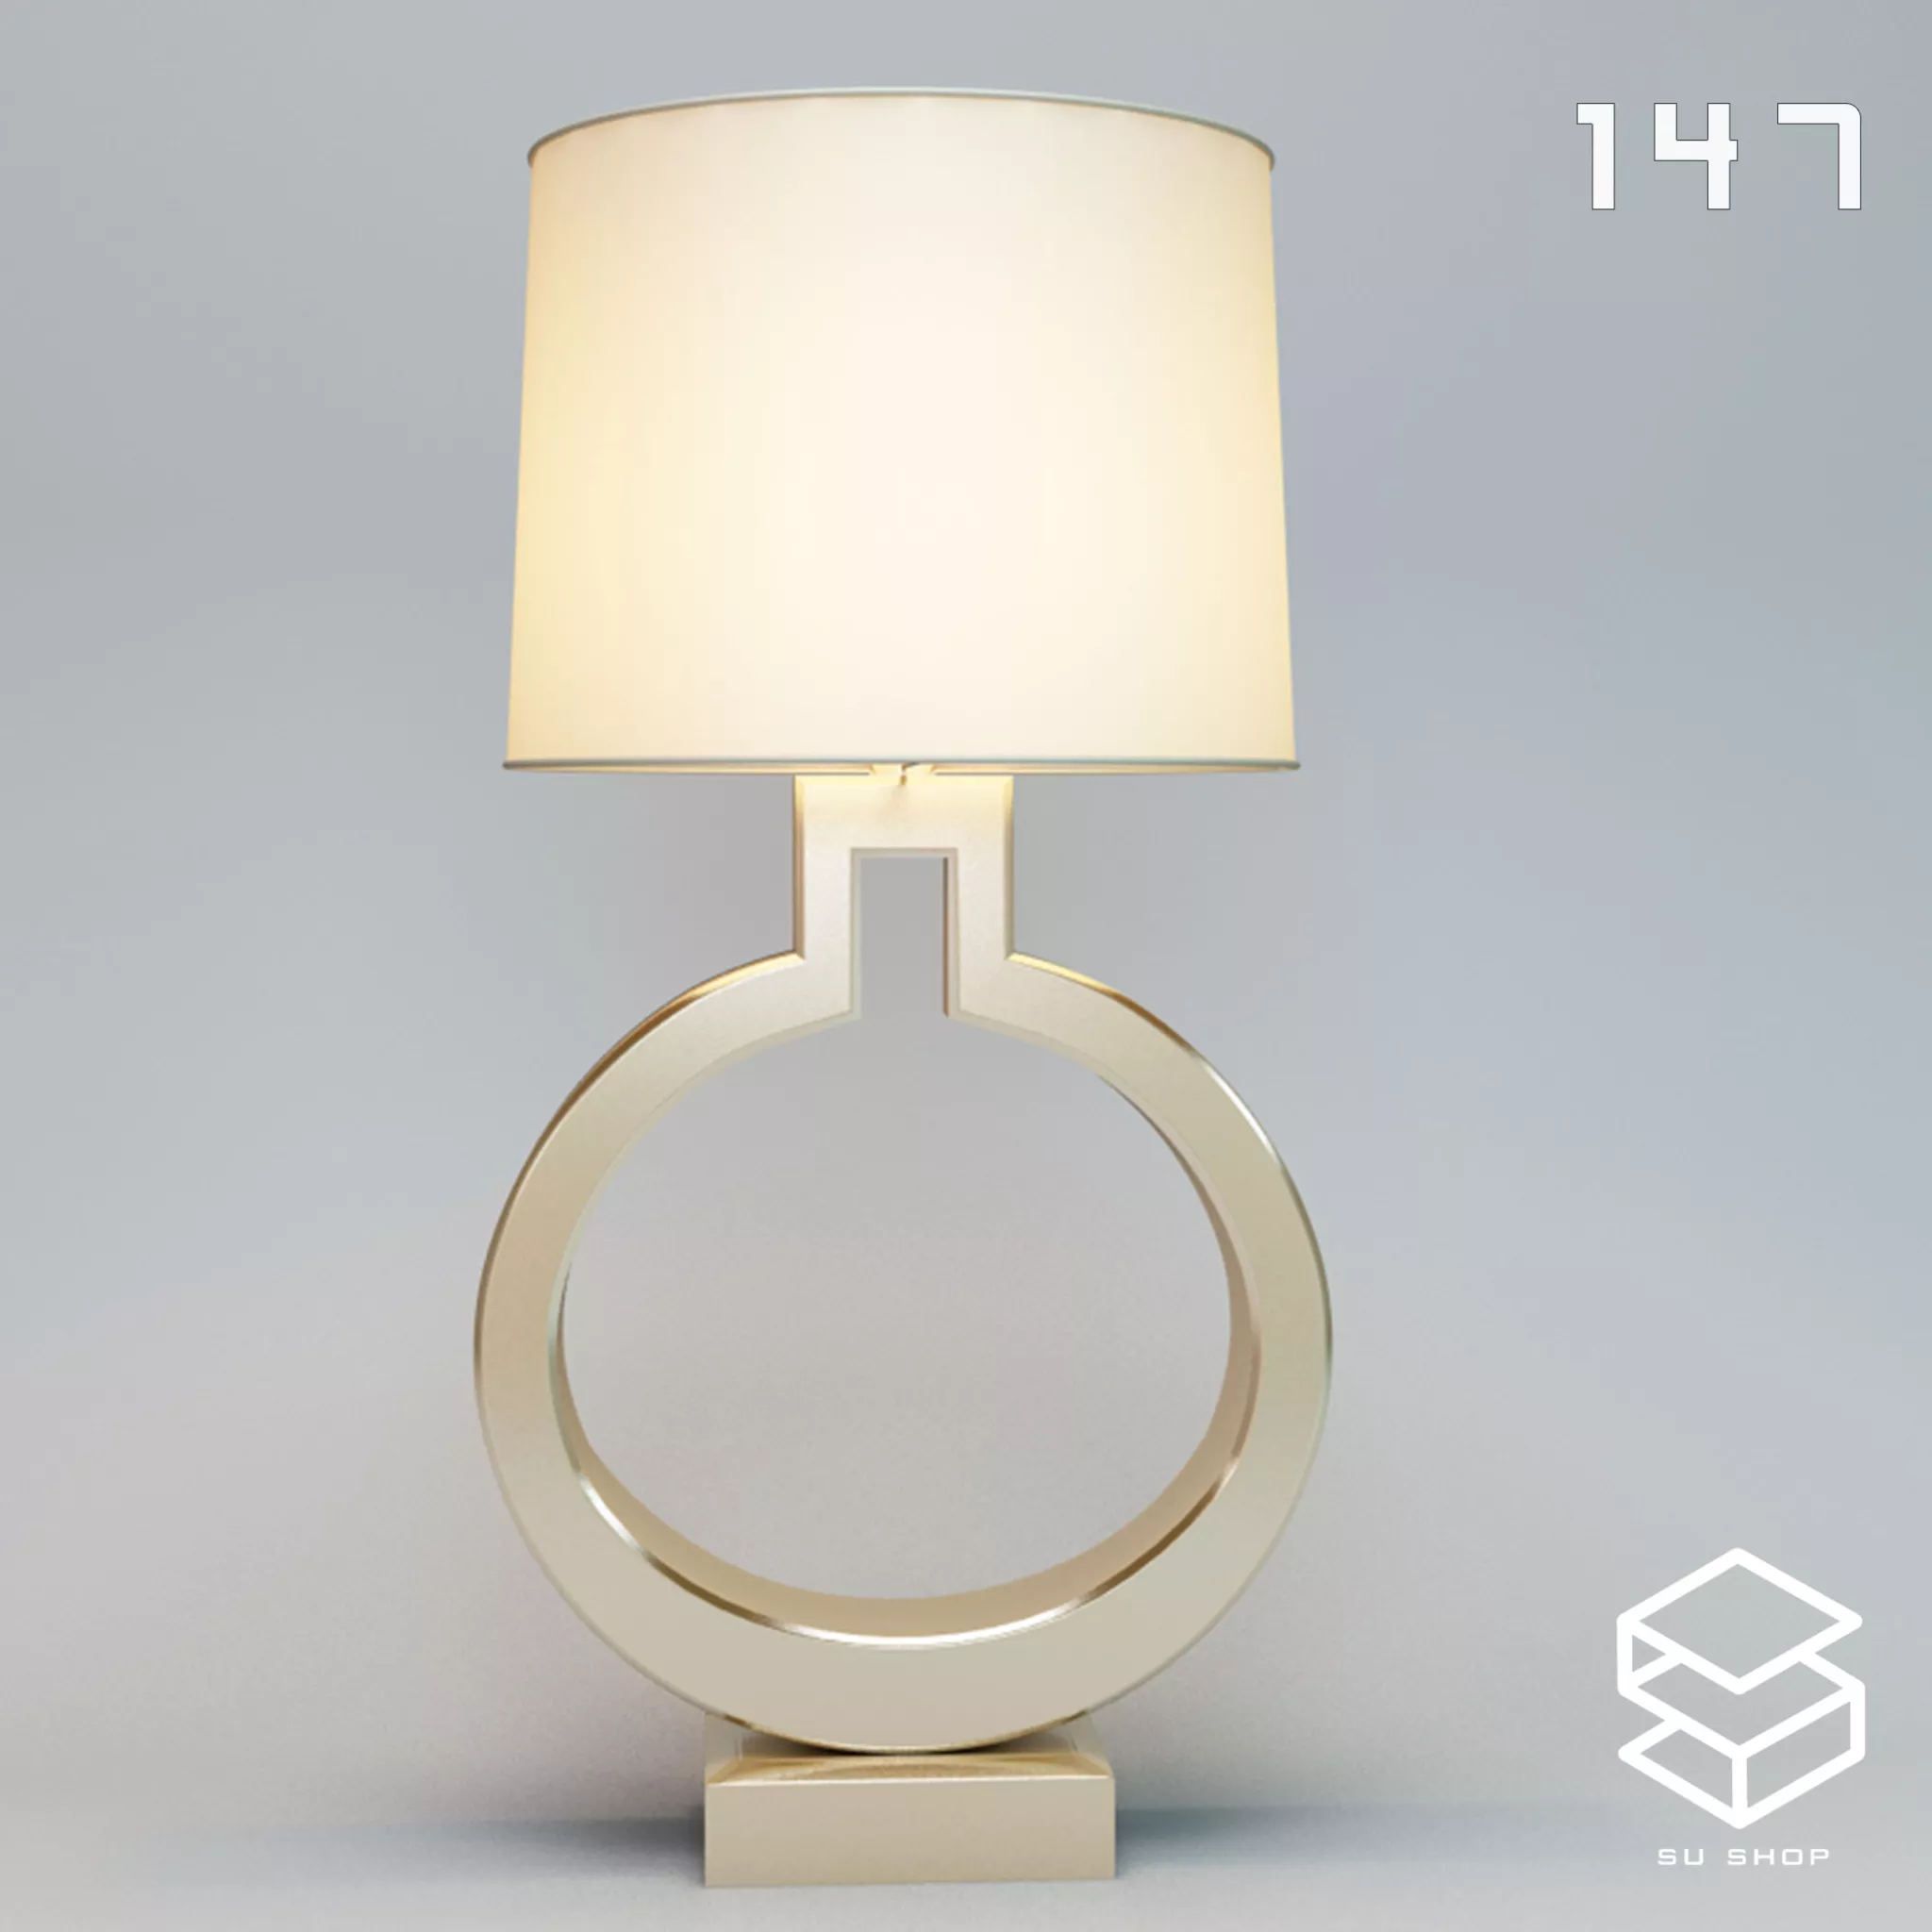 MODERN TABLE LAMP - SKETCHUP 3D MODEL - VRAY OR ENSCAPE - ID14716